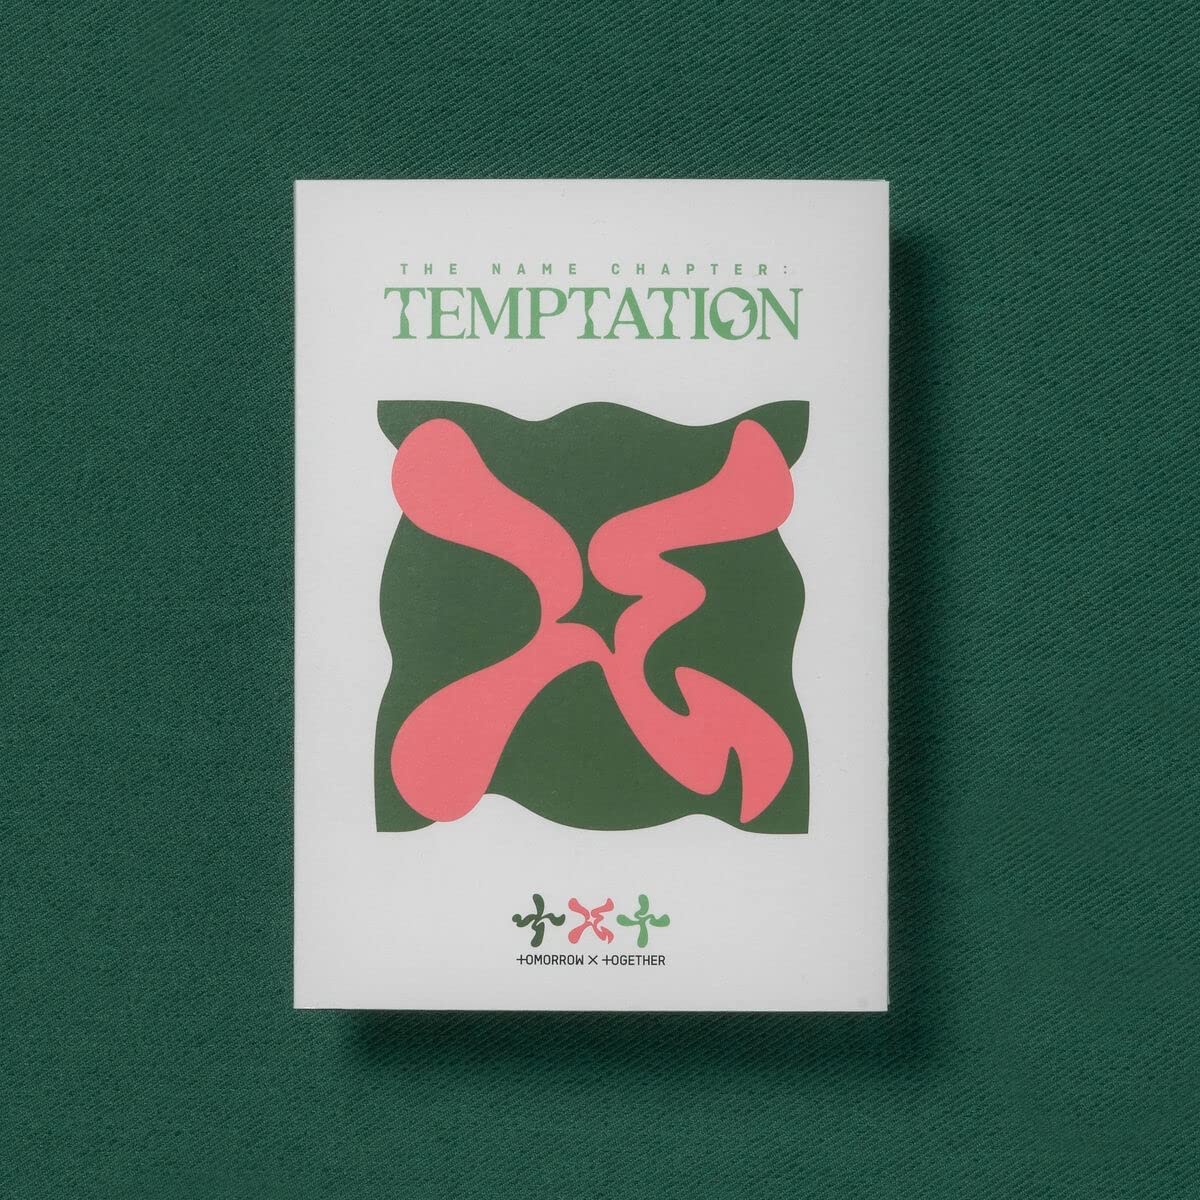 Tomorrow X Together The Name Chapter: Temptation (lullaby)